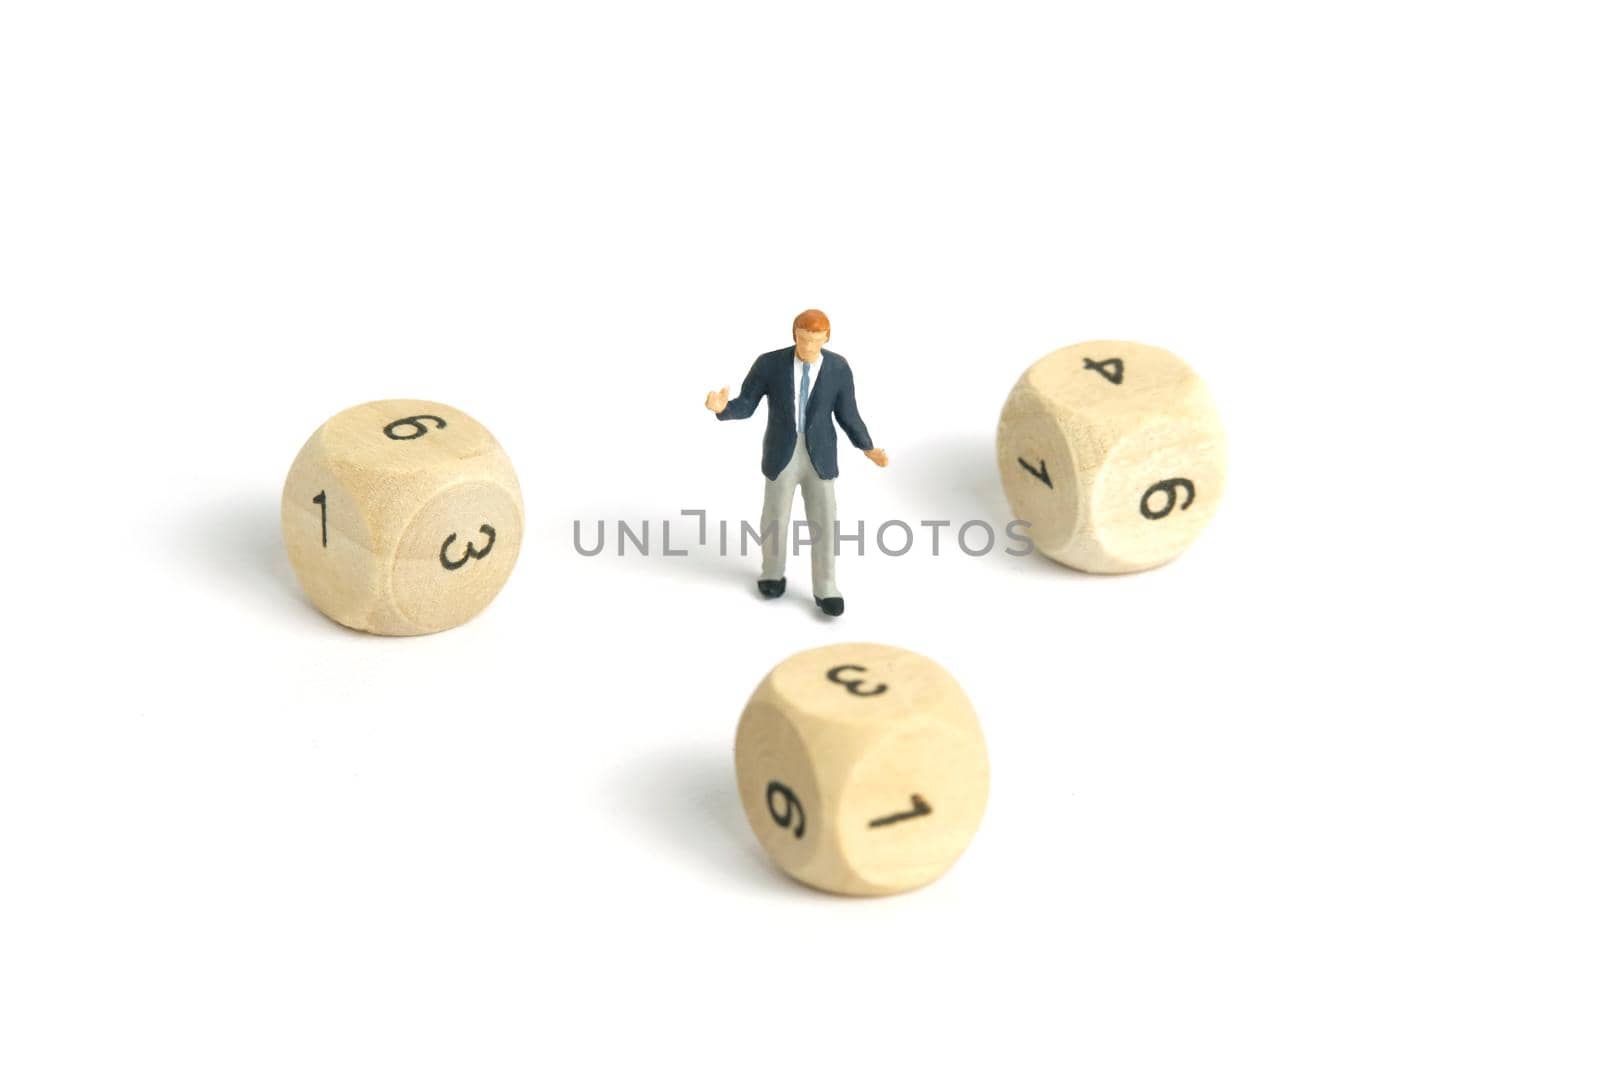 Miniature people toy figure photography. A shrugging businessman standing in the middle of wooden dice. Isolated on white background. Image photo